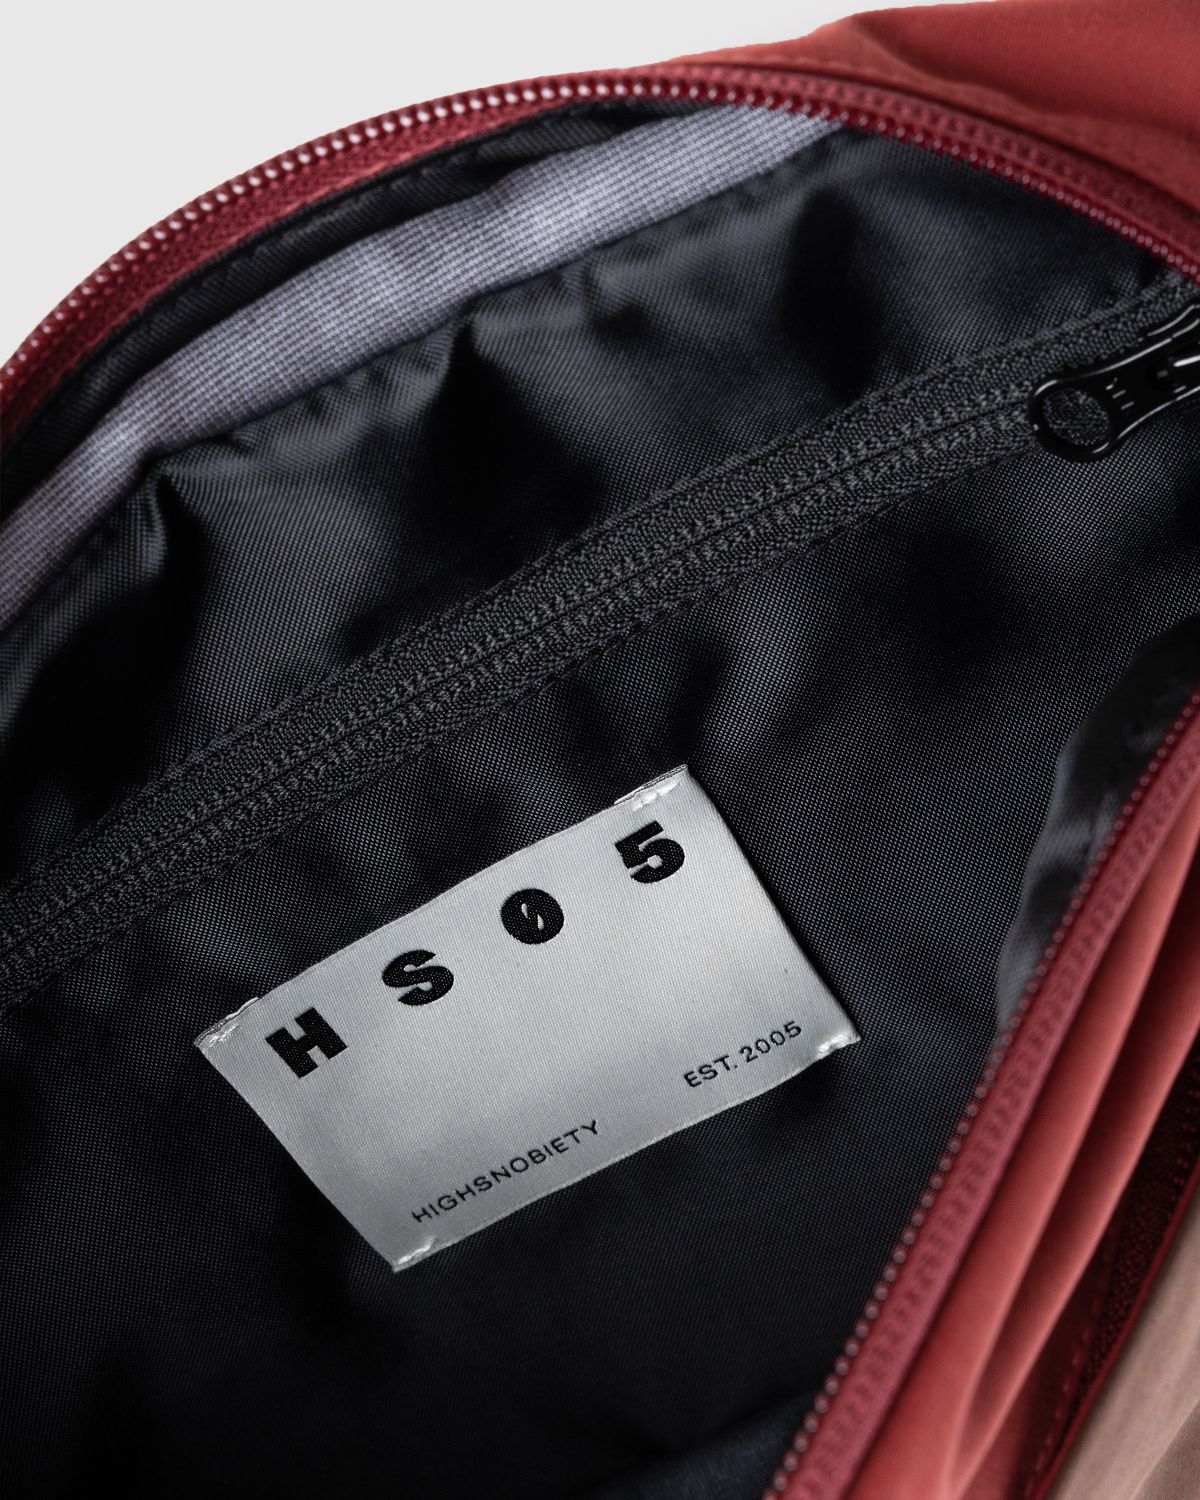 Highsnobiety HS05 – 3 Layer Nylon Side Bag Red - Bags - Red - Image 6